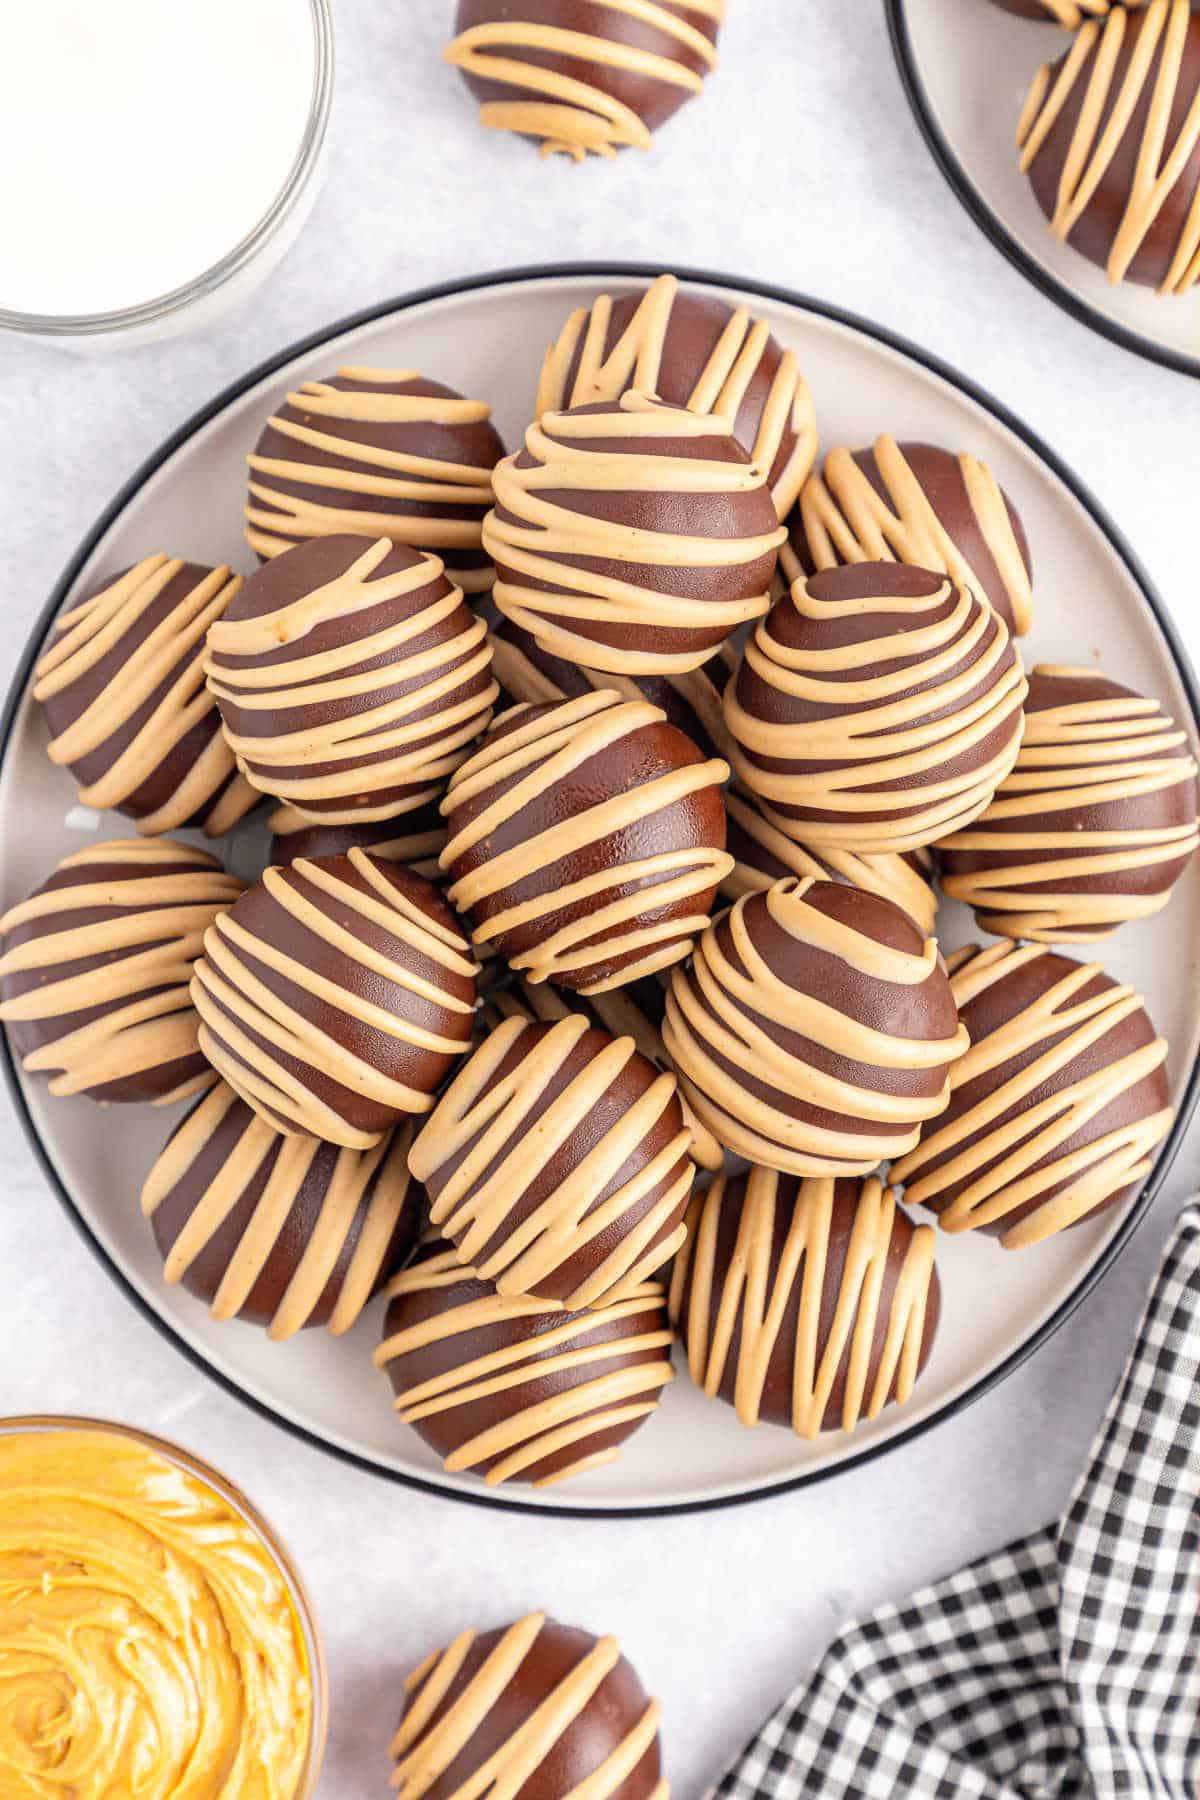 Chocolate covered peanut butter balls on a plate.